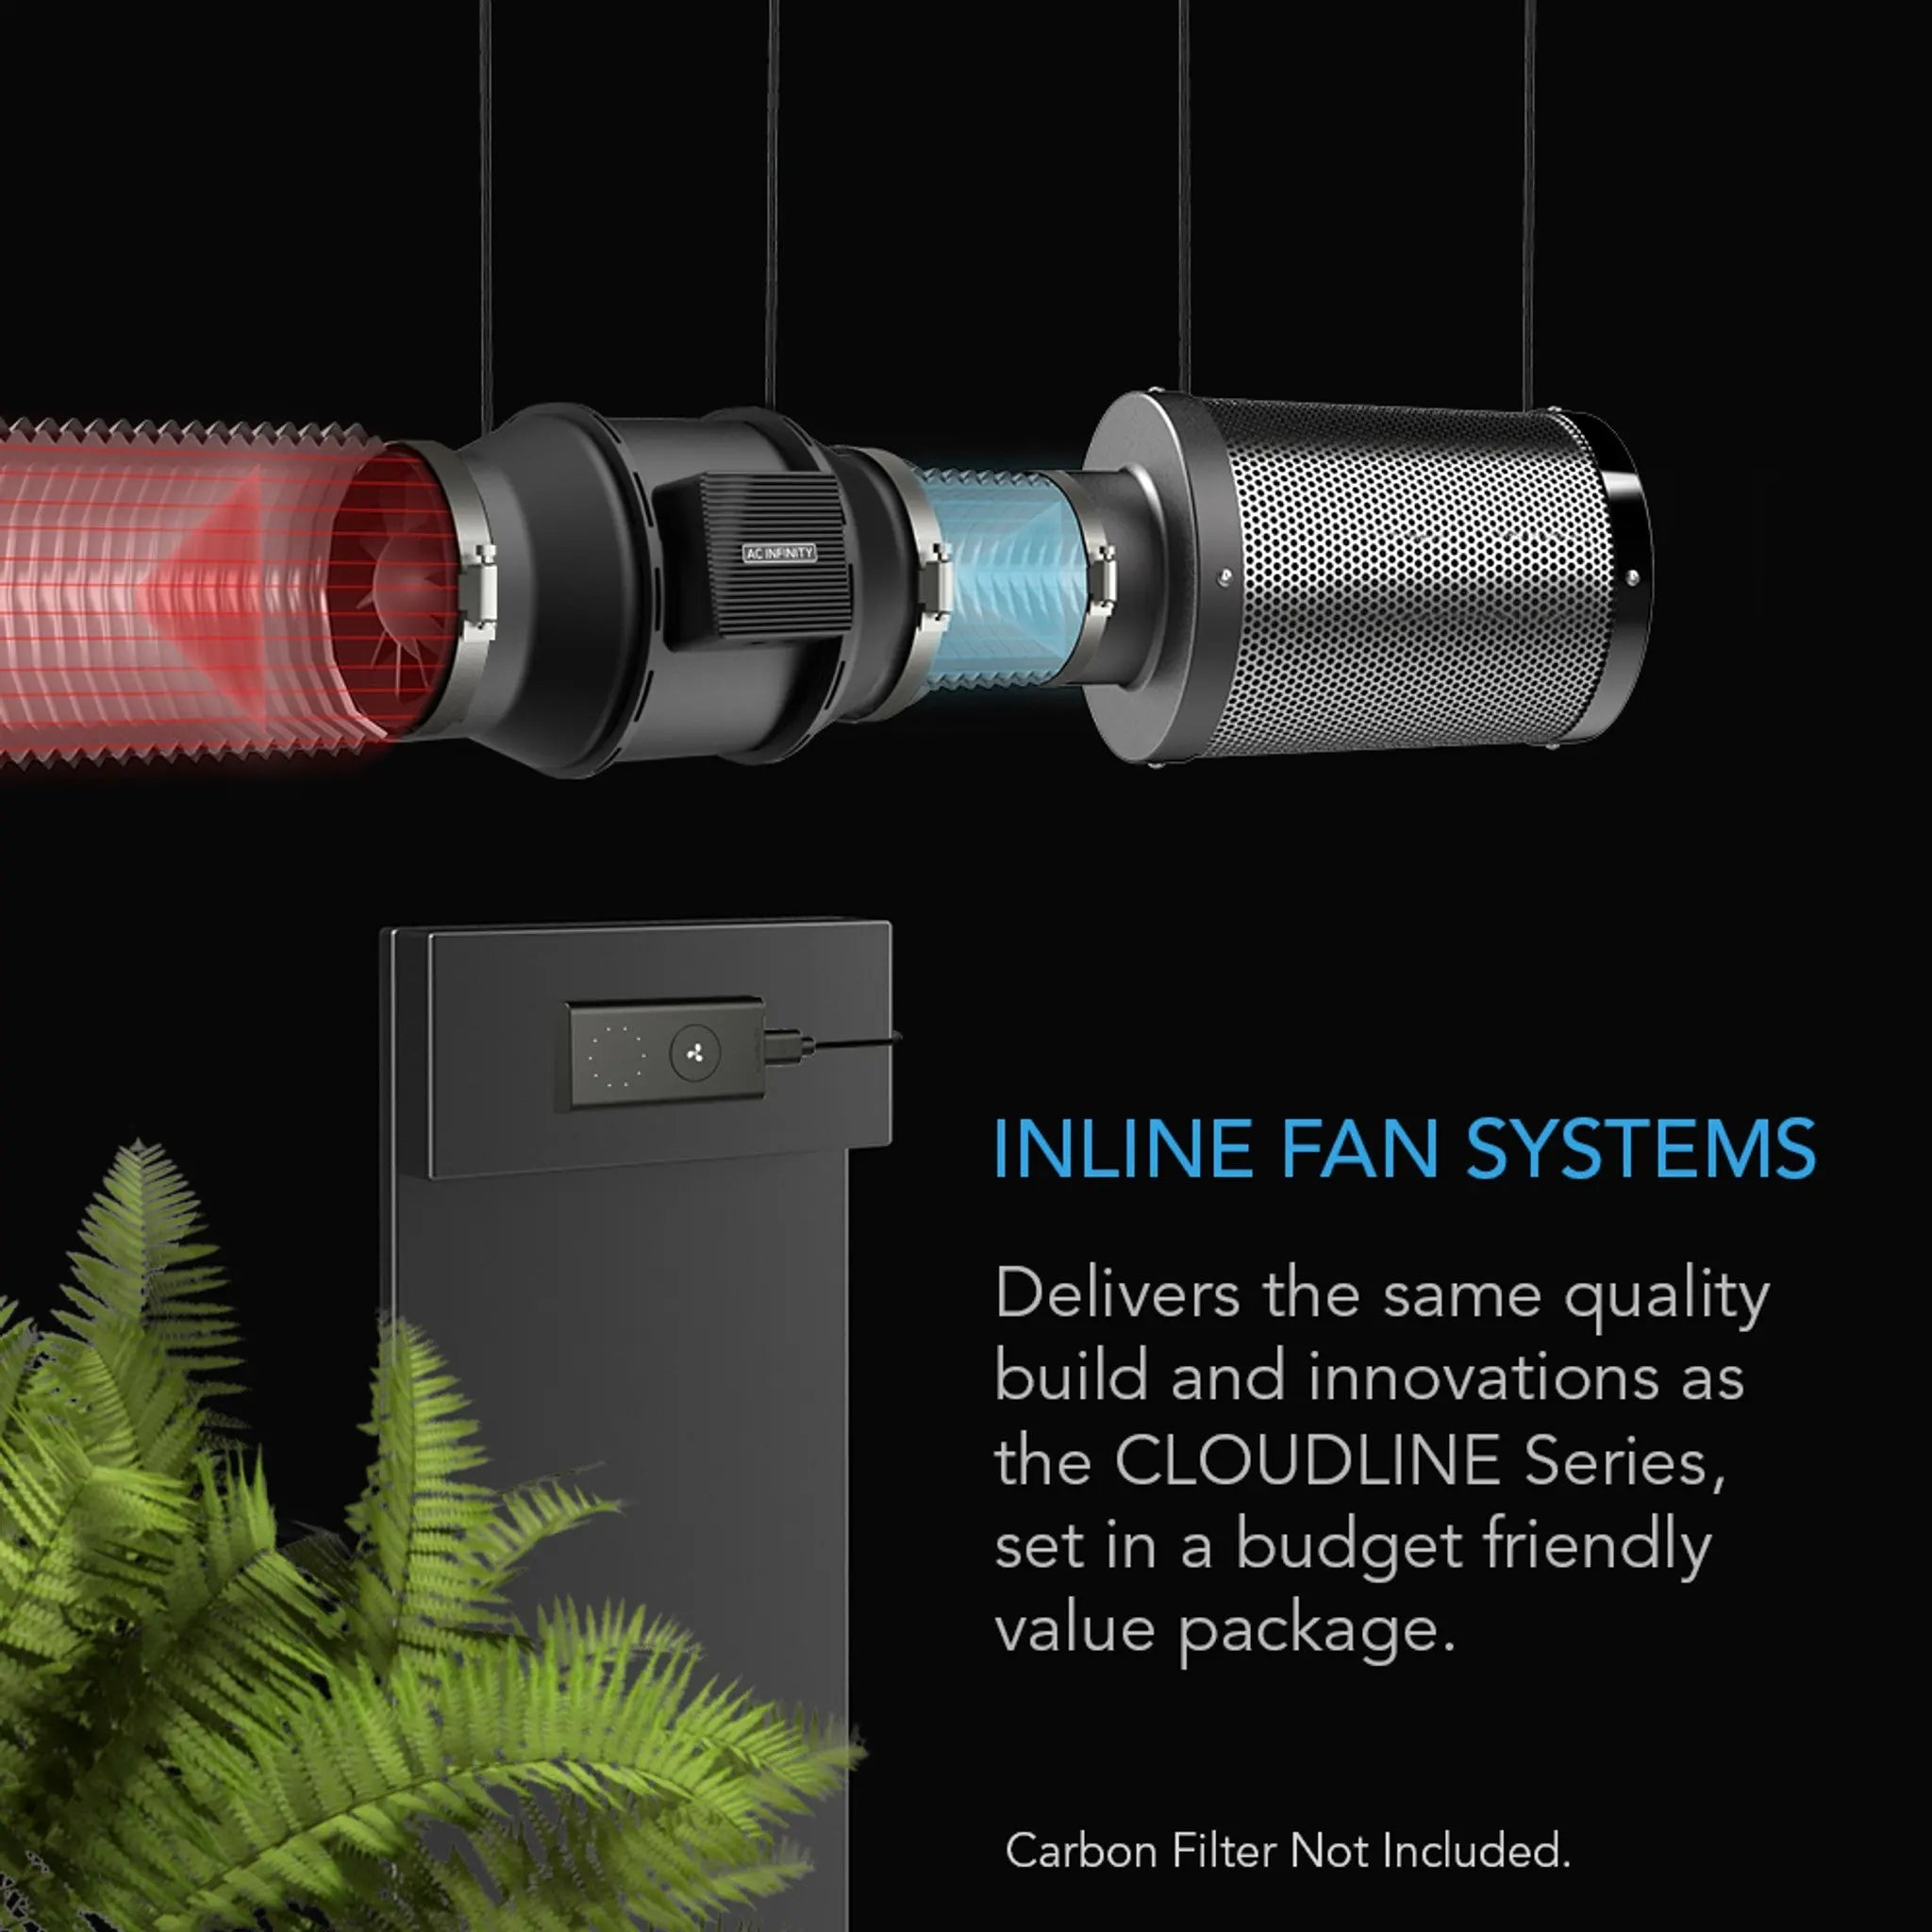 AC Infinity CLOUDLINE LITE A4 Inline Duct Fan System with Speed Controller, 4"